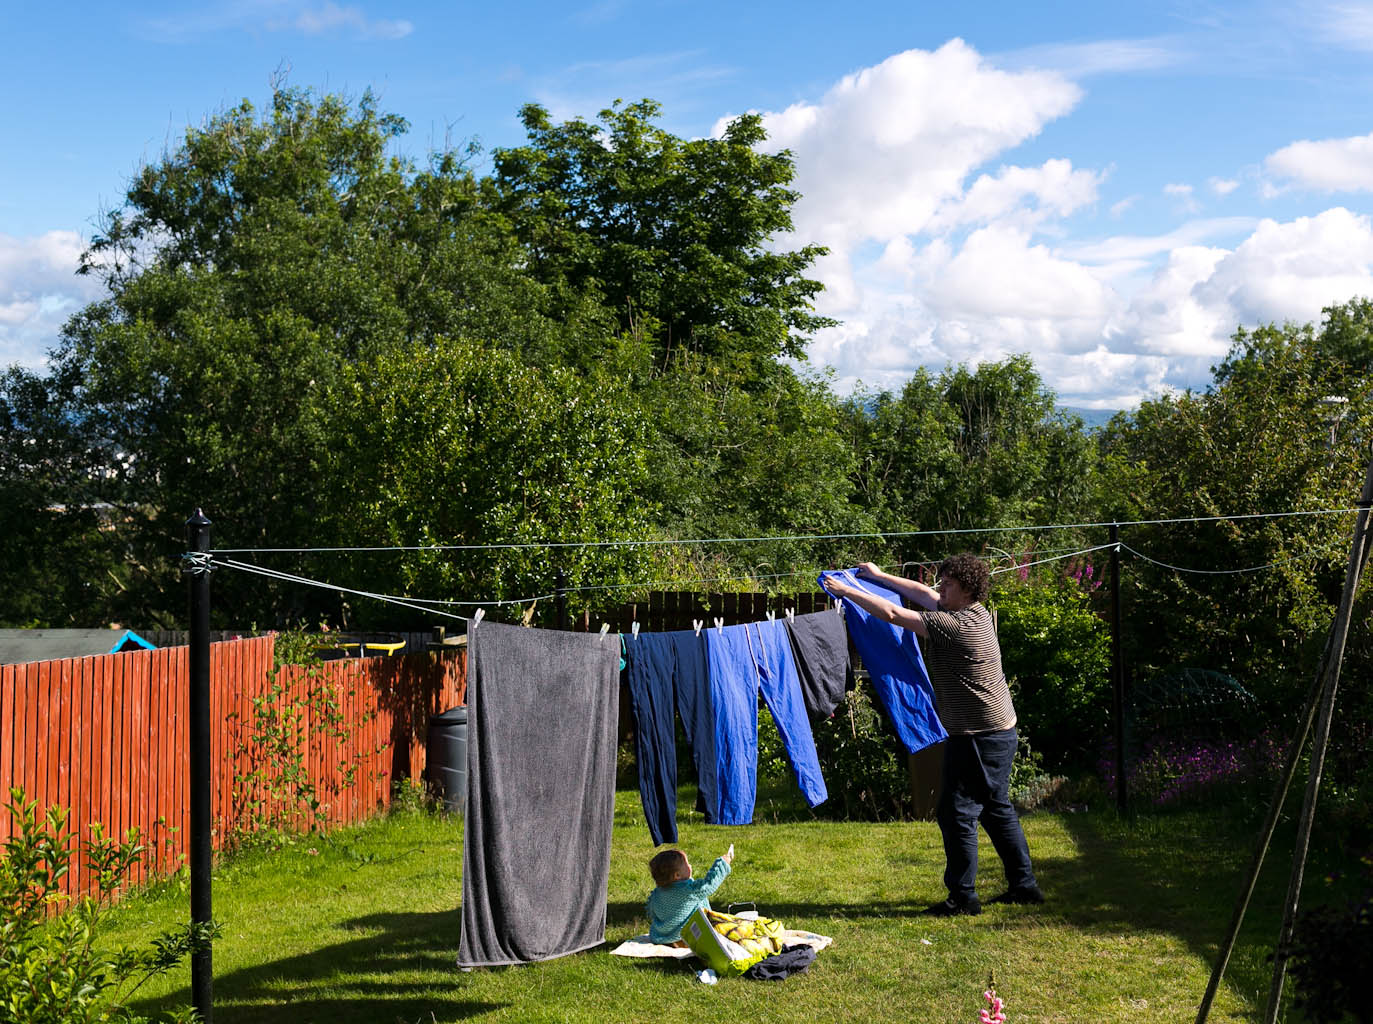 Father hanging washing on line with baby daughter